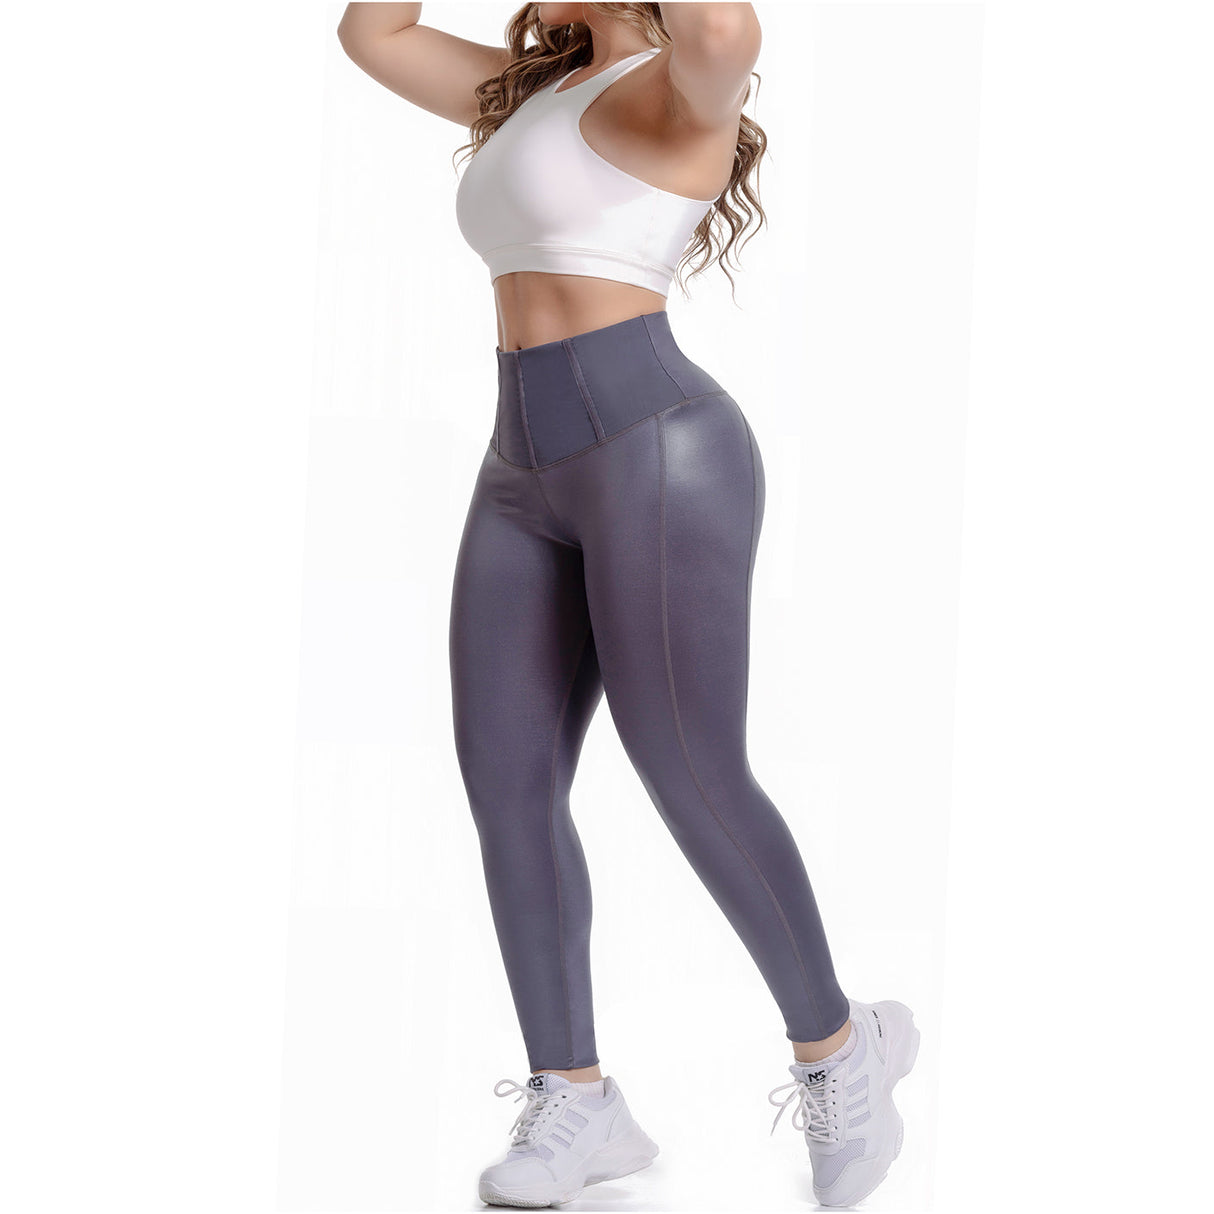 Leggings to shape your belly and buttocks.